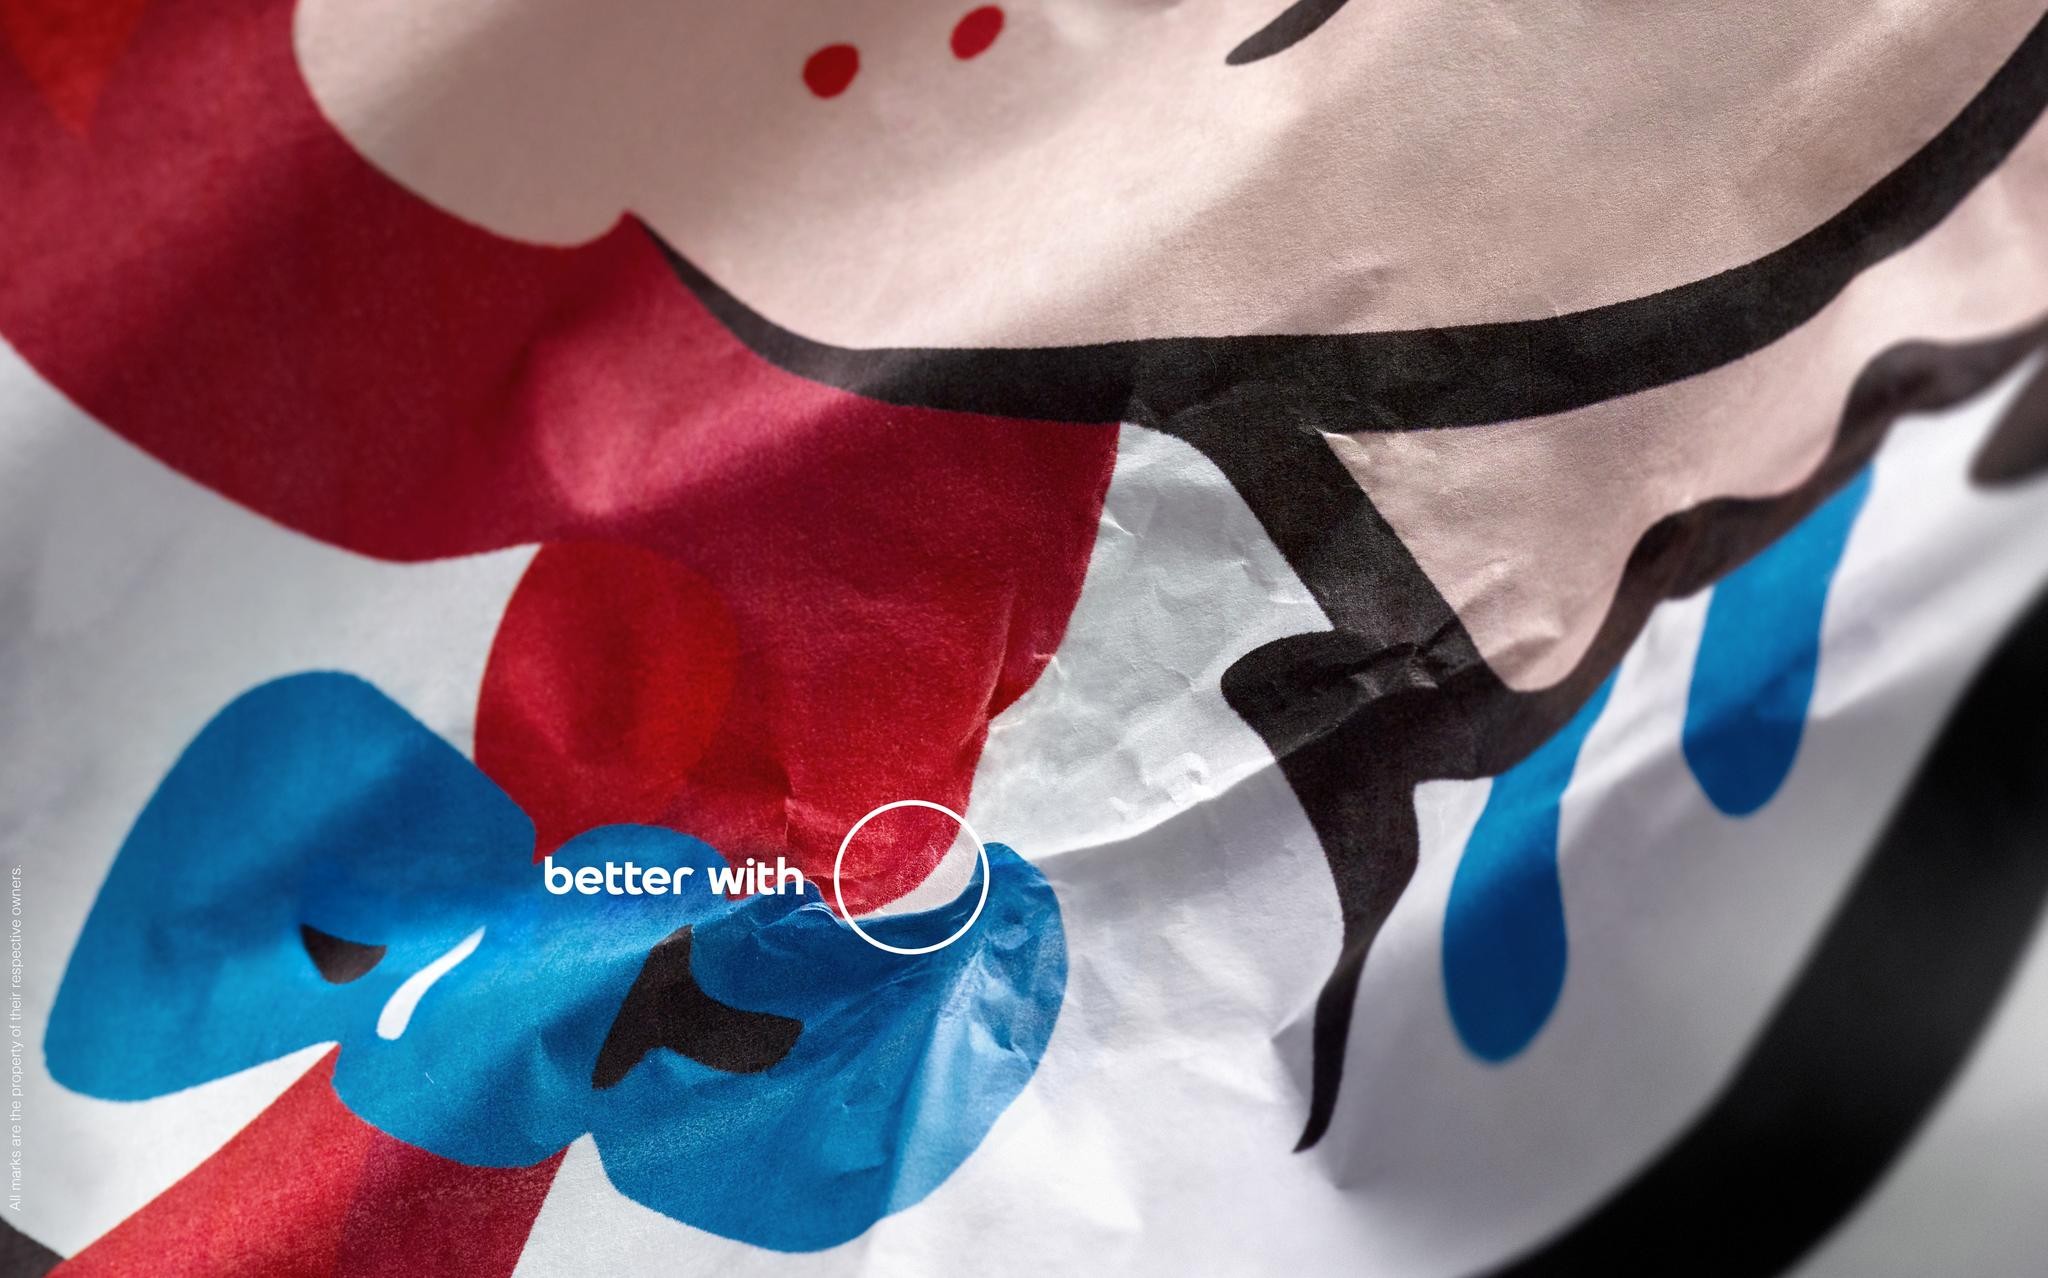 BETTER WITH PEPSI - WENDY'S